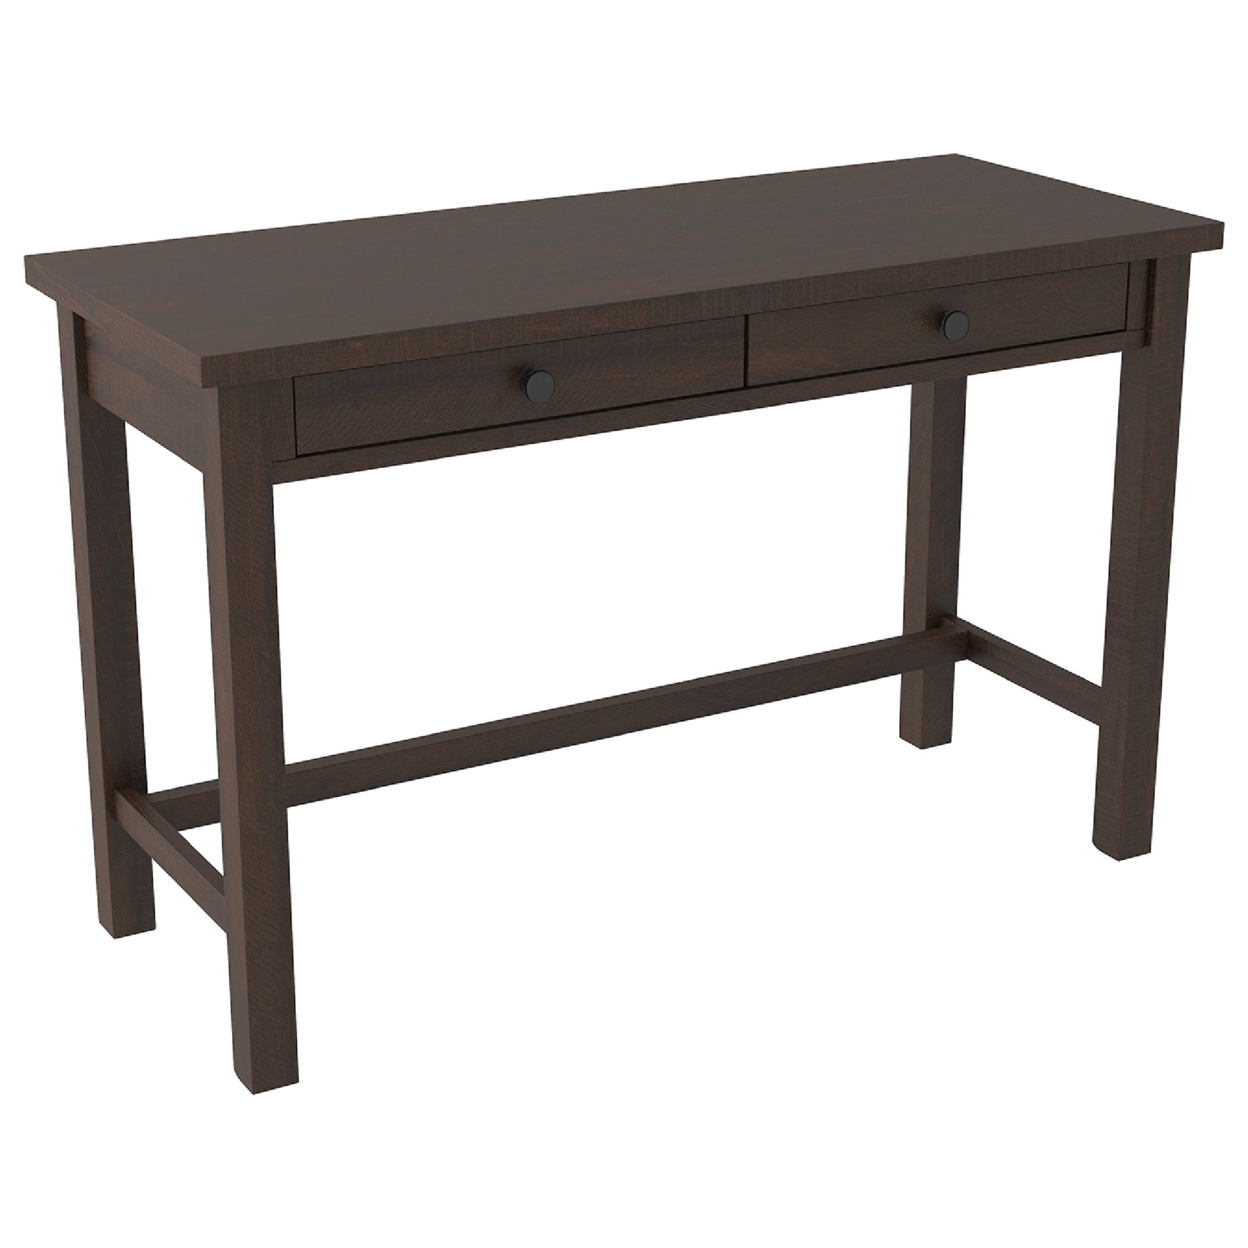 Wooden Writing Desk With Block Legs And 2 Drawers, Dark Brown And Black- Saltoro Sherpi